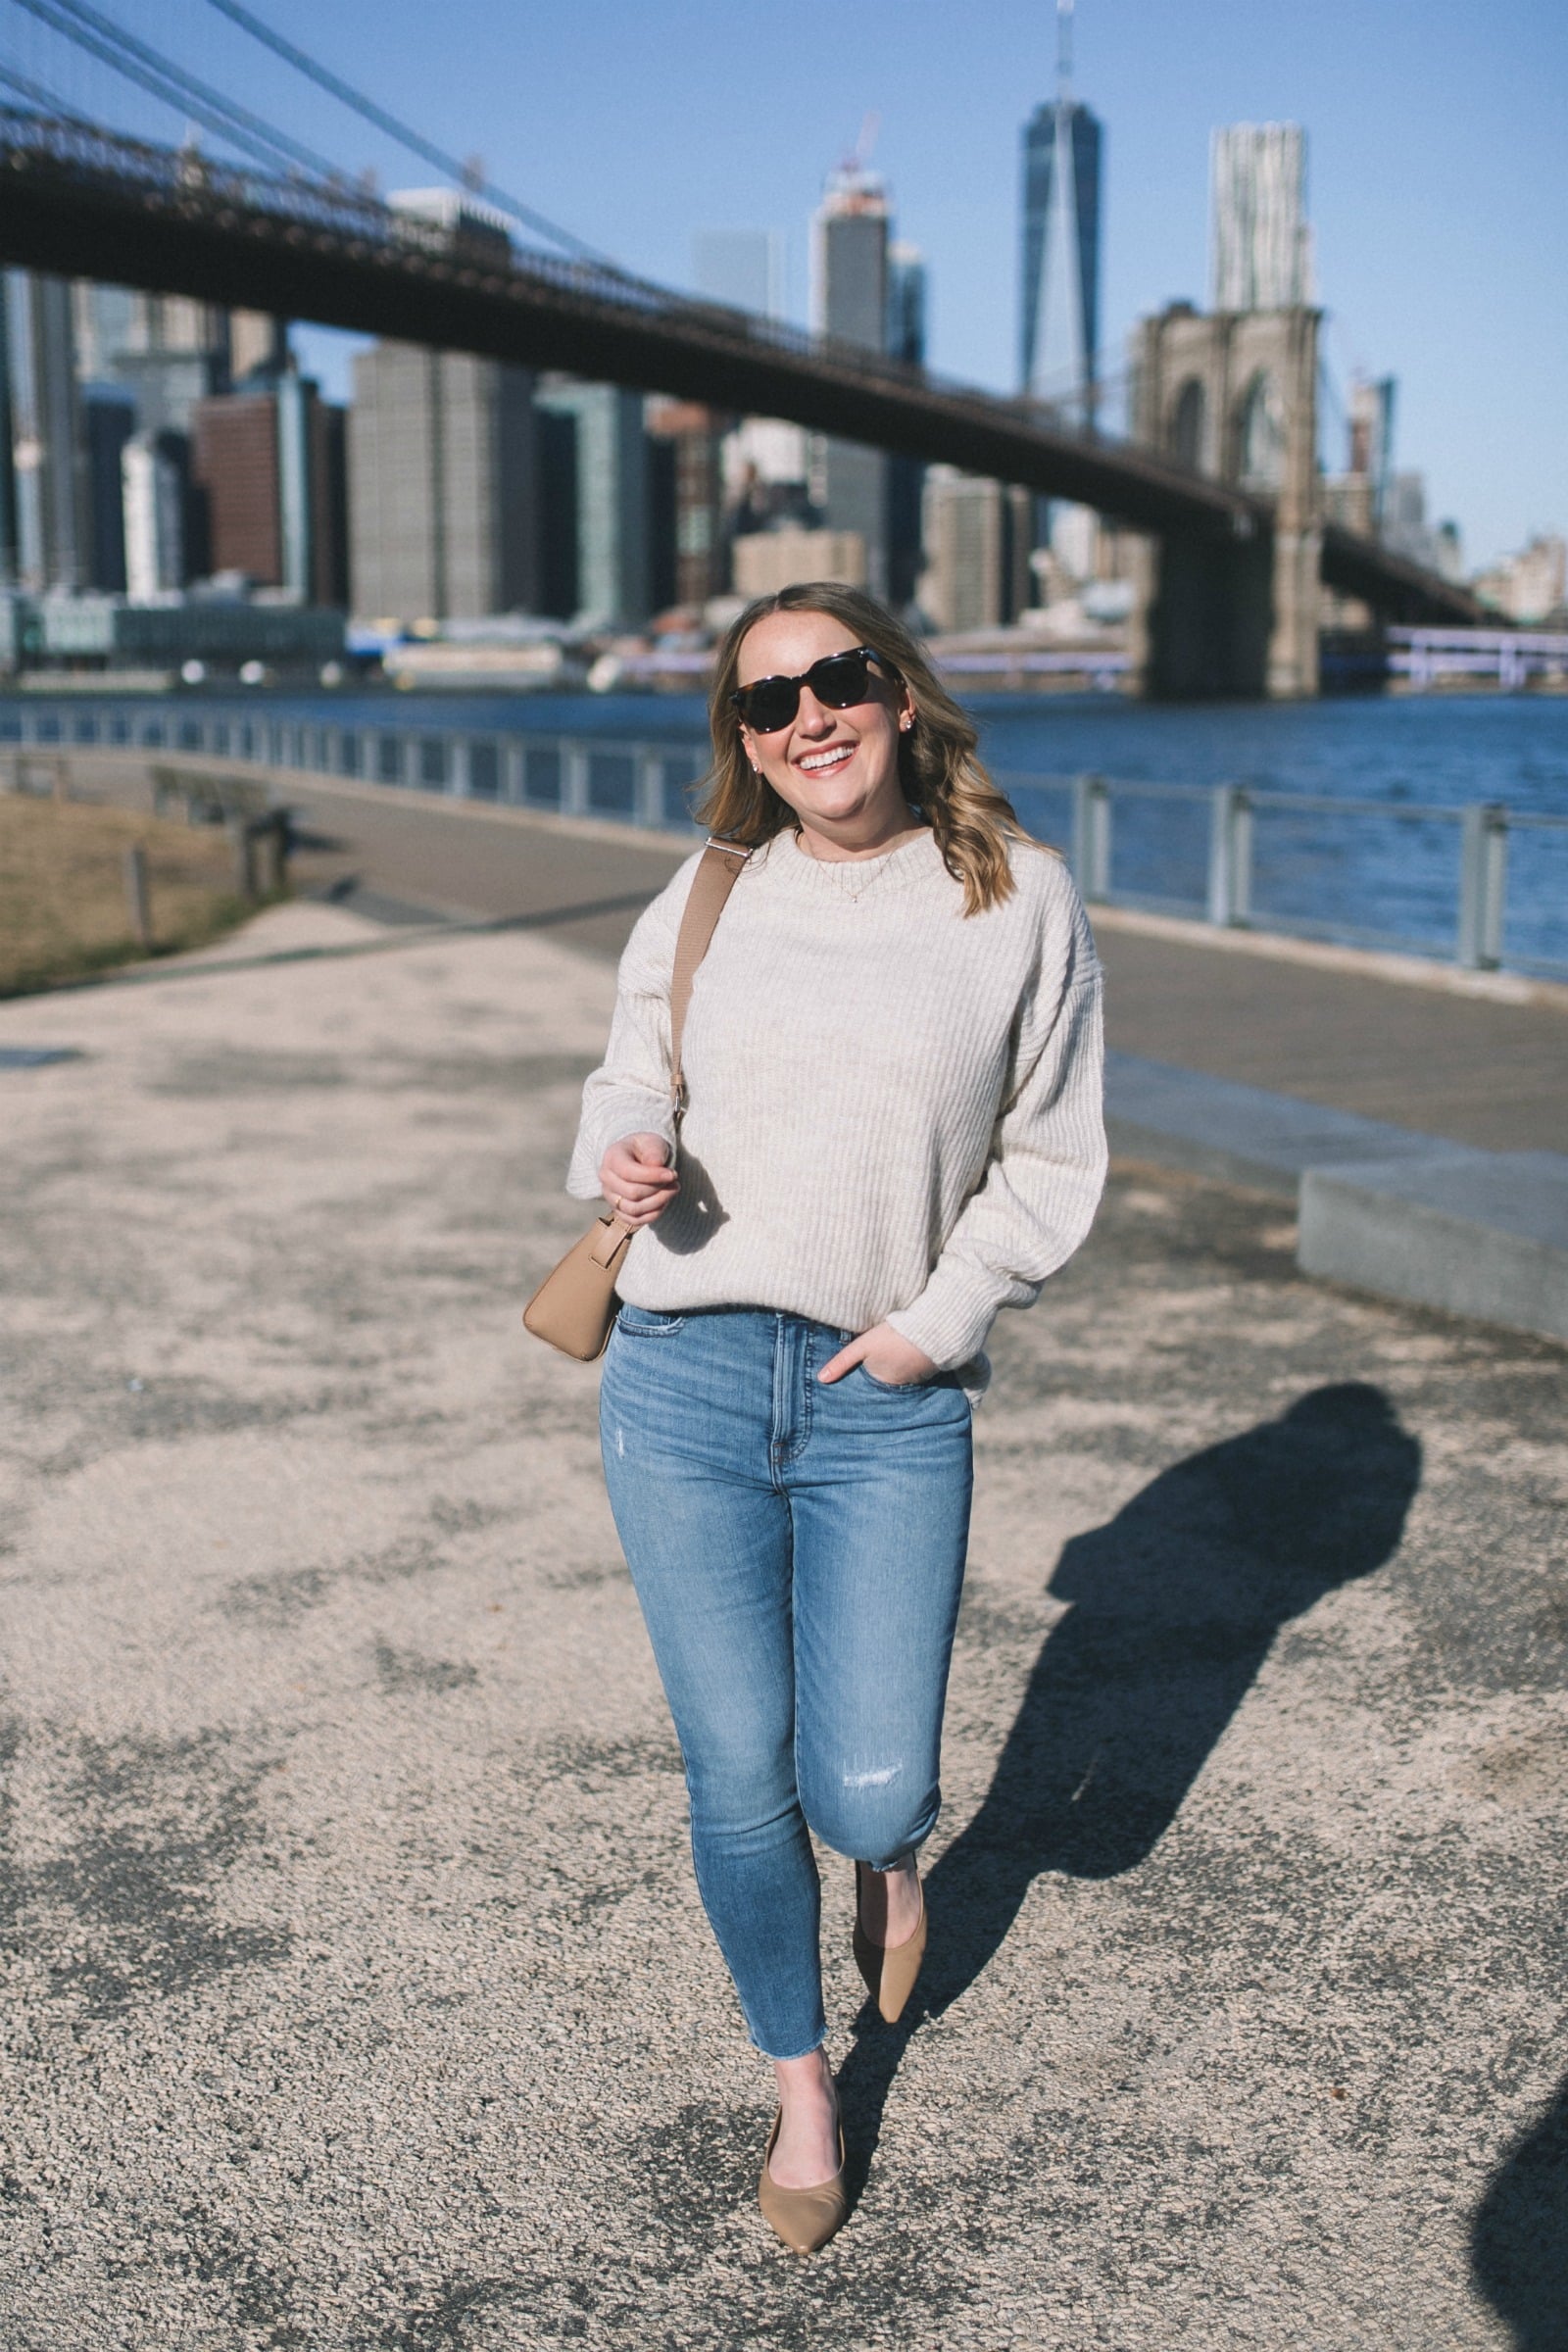 Easy Every Day Everlane Outfit I wit & whimsy | Styling Everlanes New Arrivals